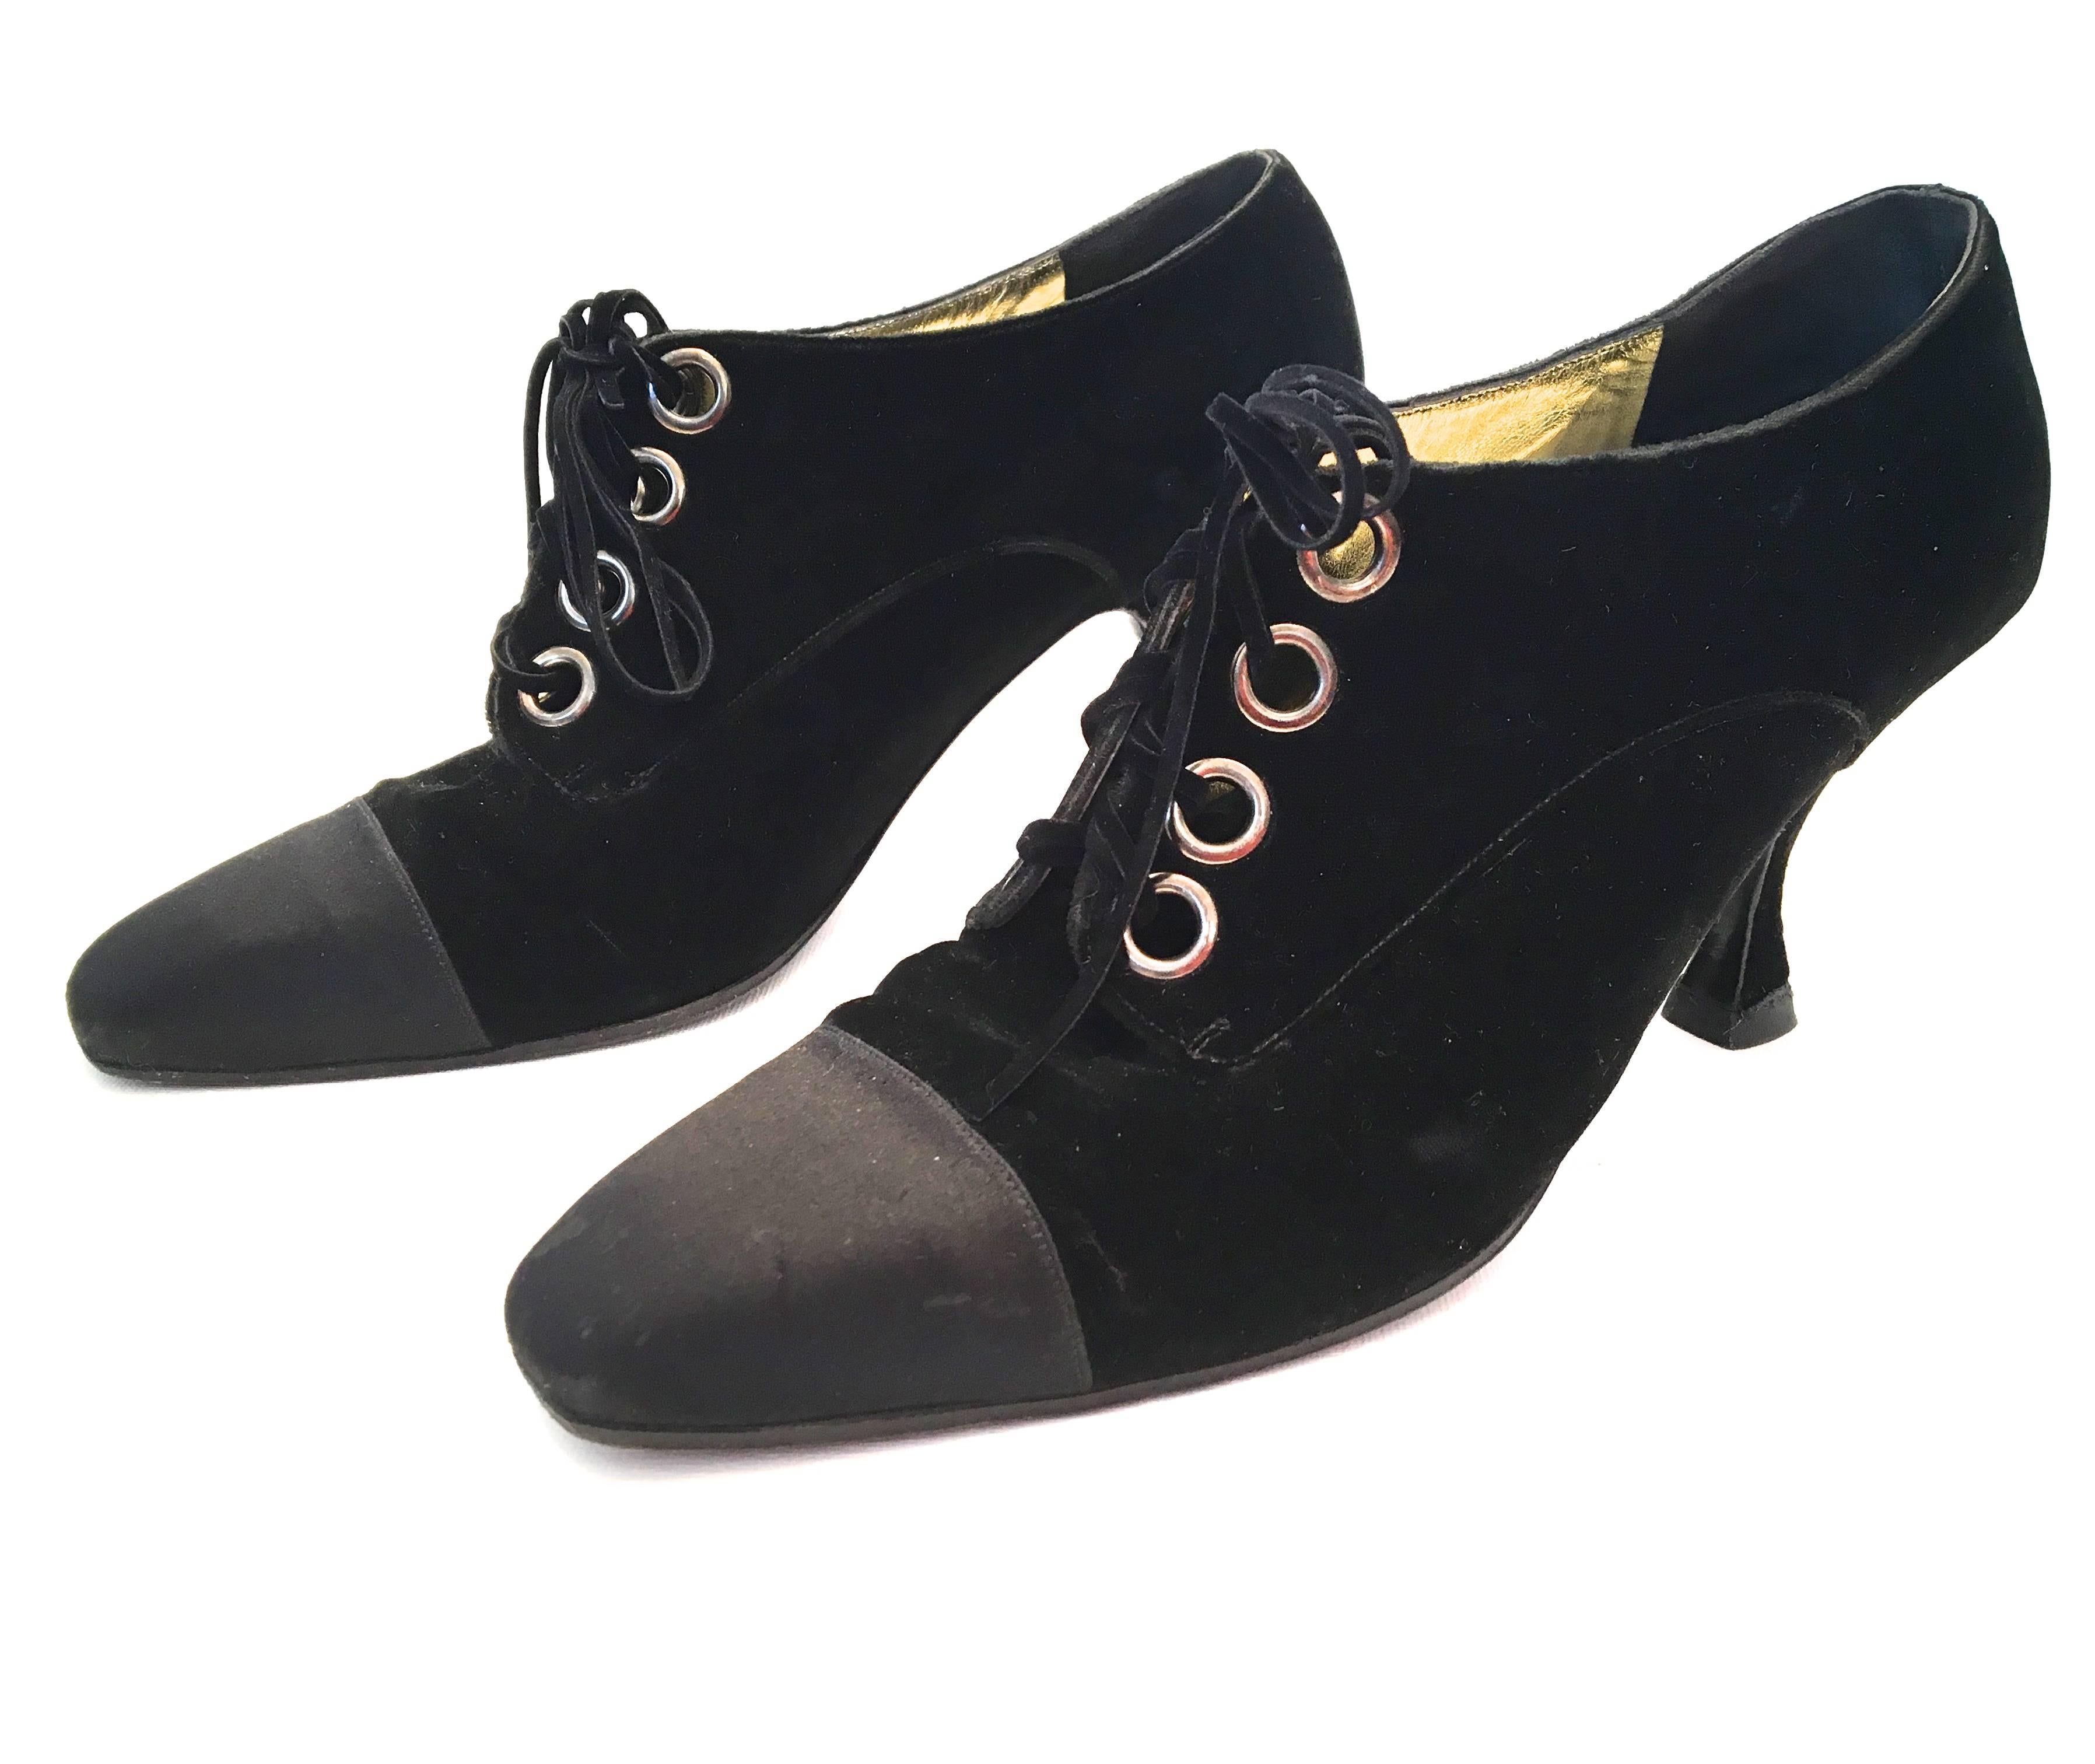 Chanel Velvet Tie-Up Shoes with Square Satin Tip In Excellent Condition For Sale In Boca Raton, FL